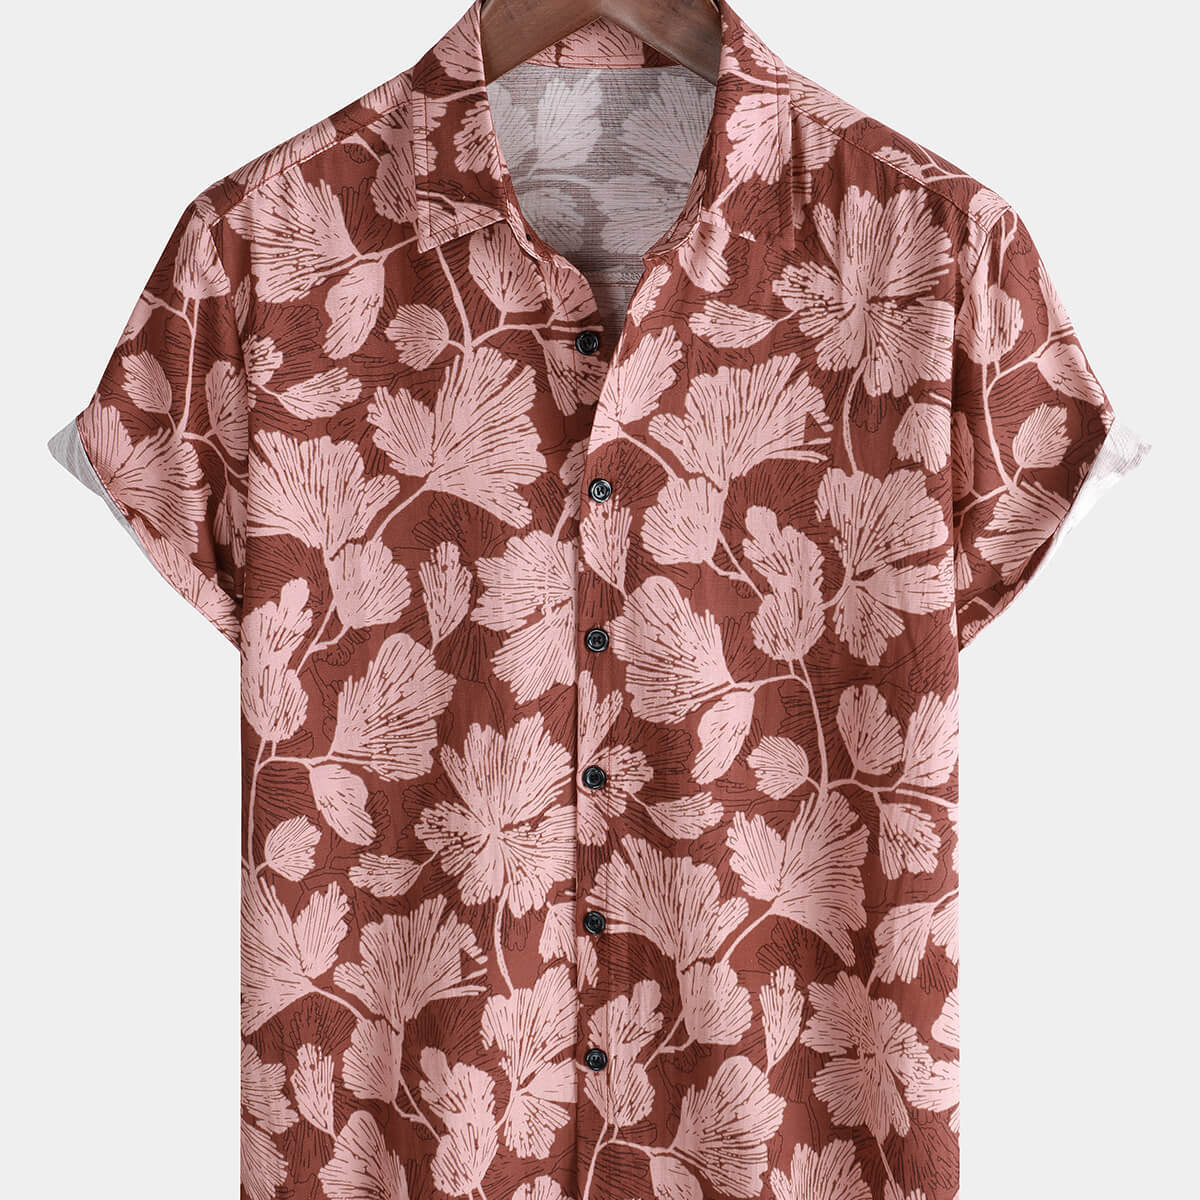 Men's Floral Tropical Holiday Casual Cotton Short Sleeve Button Up Shirt